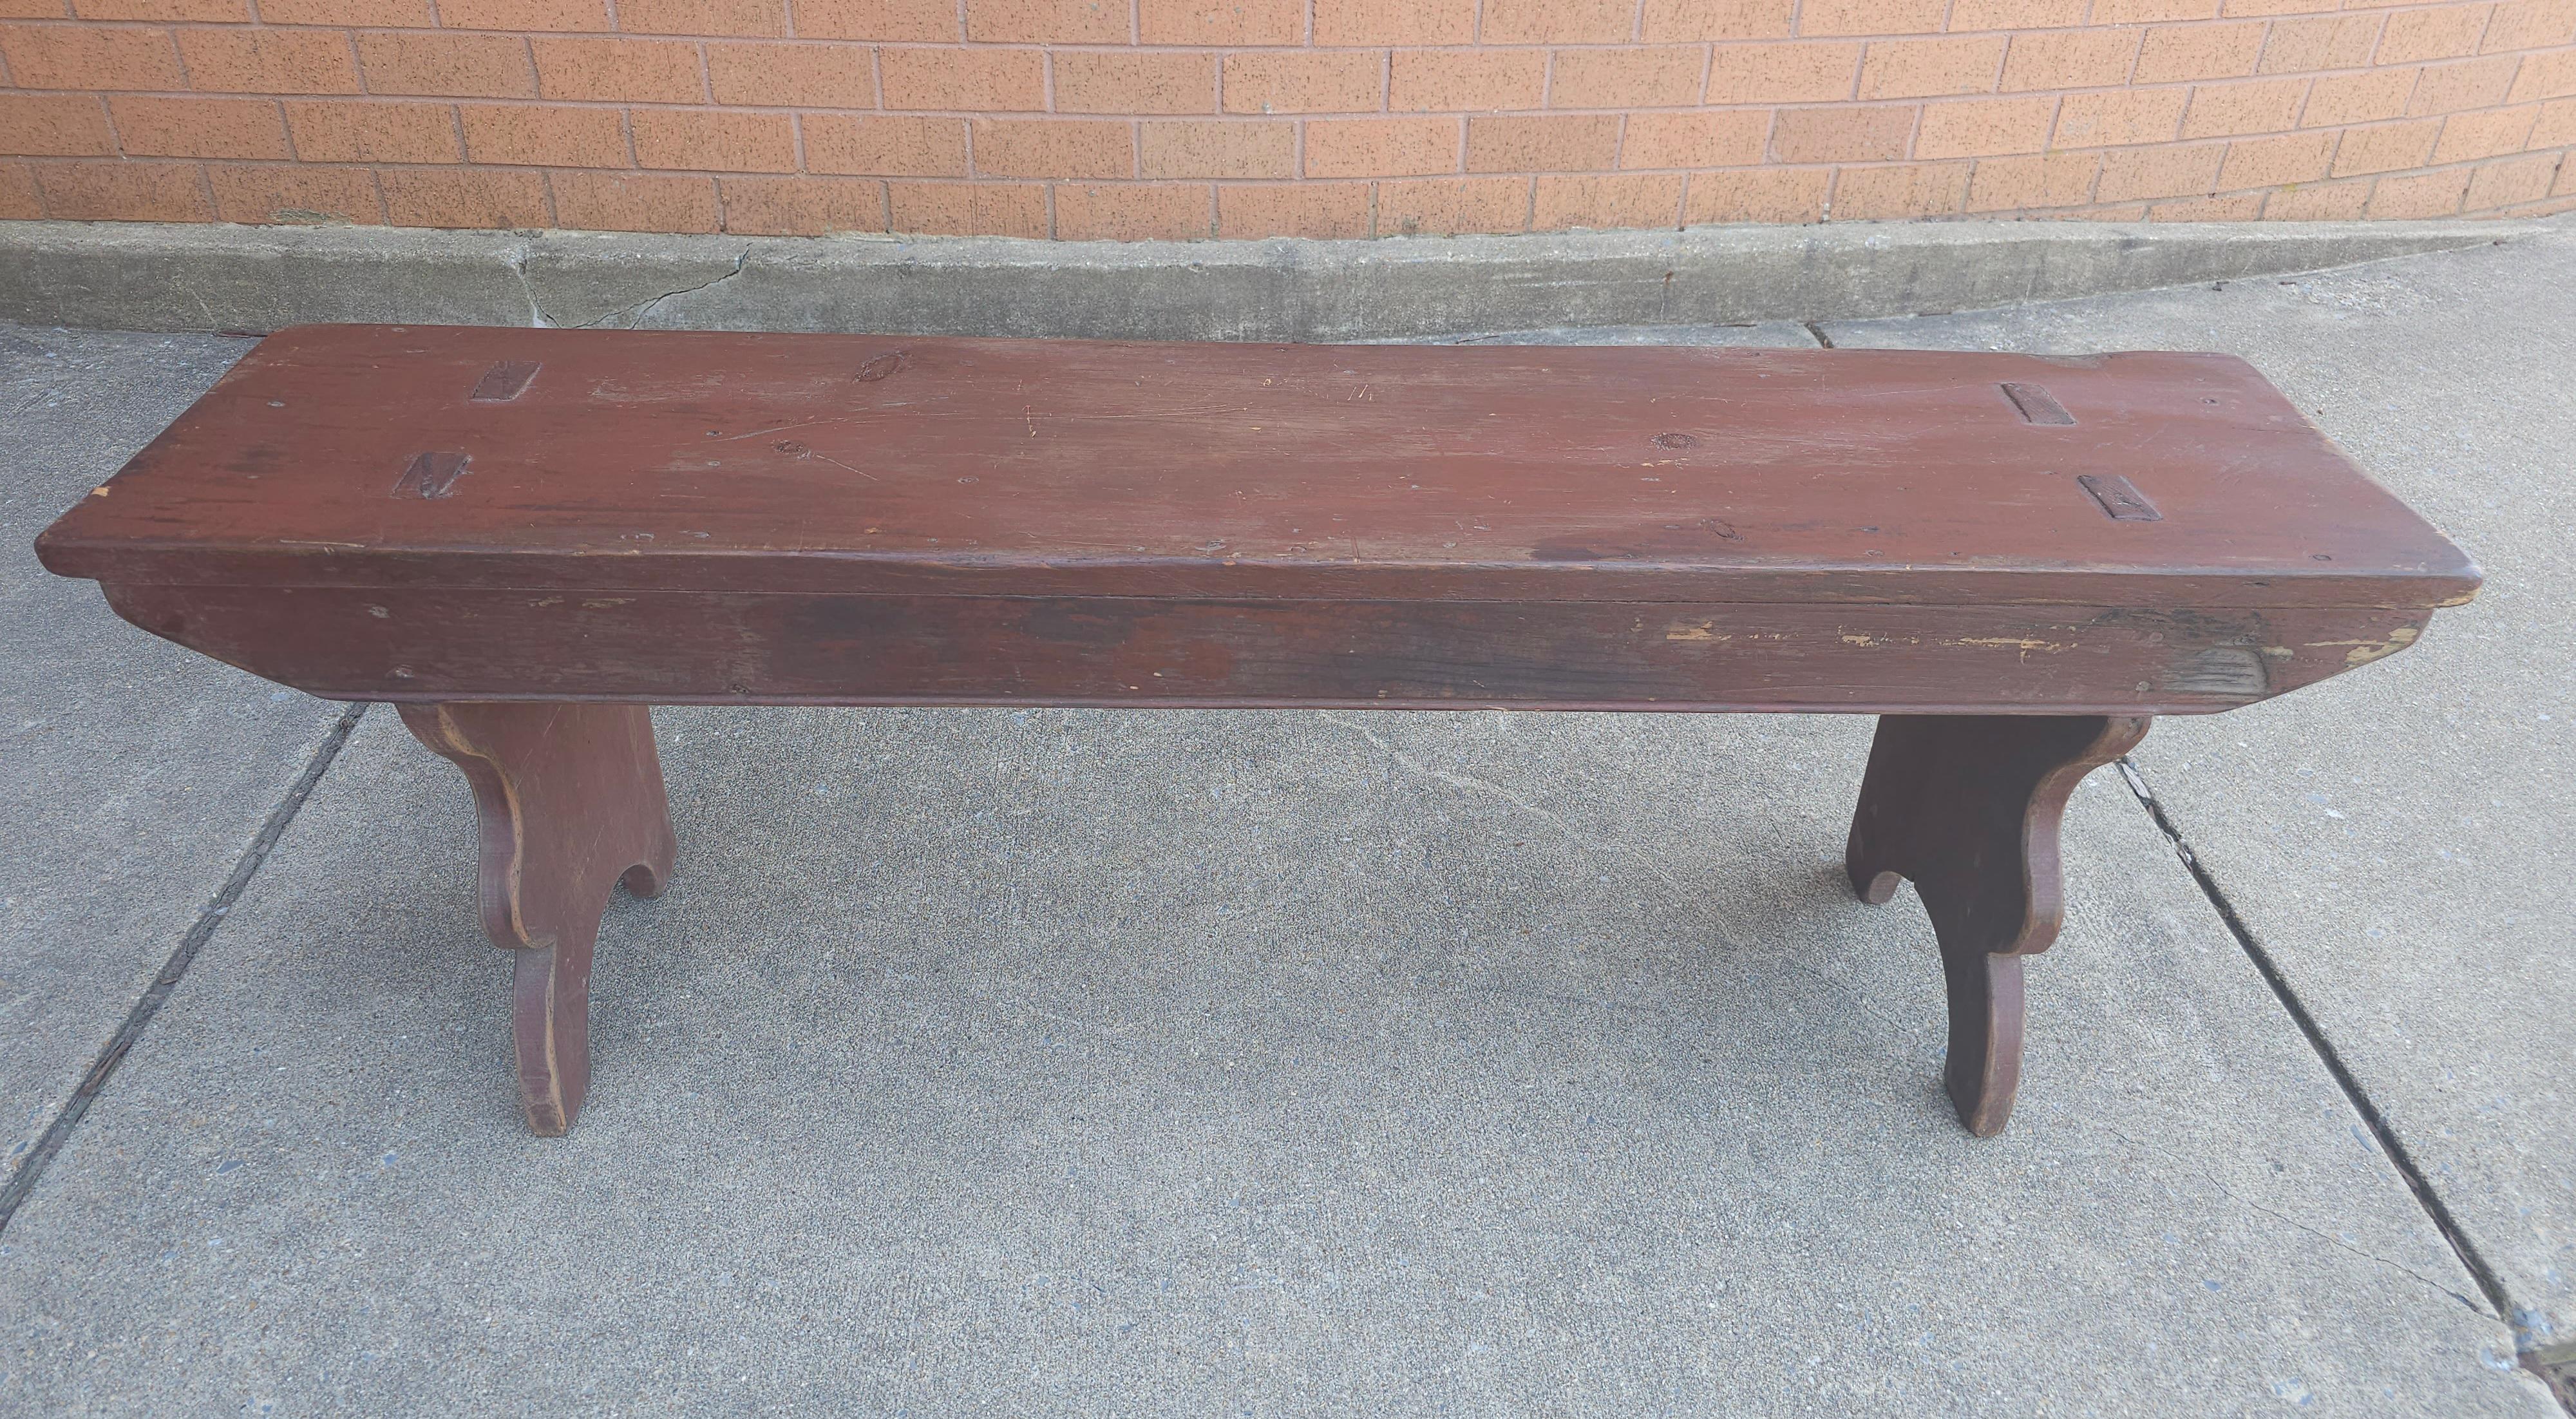 An Early American Style primitive two seater bench measuring 50